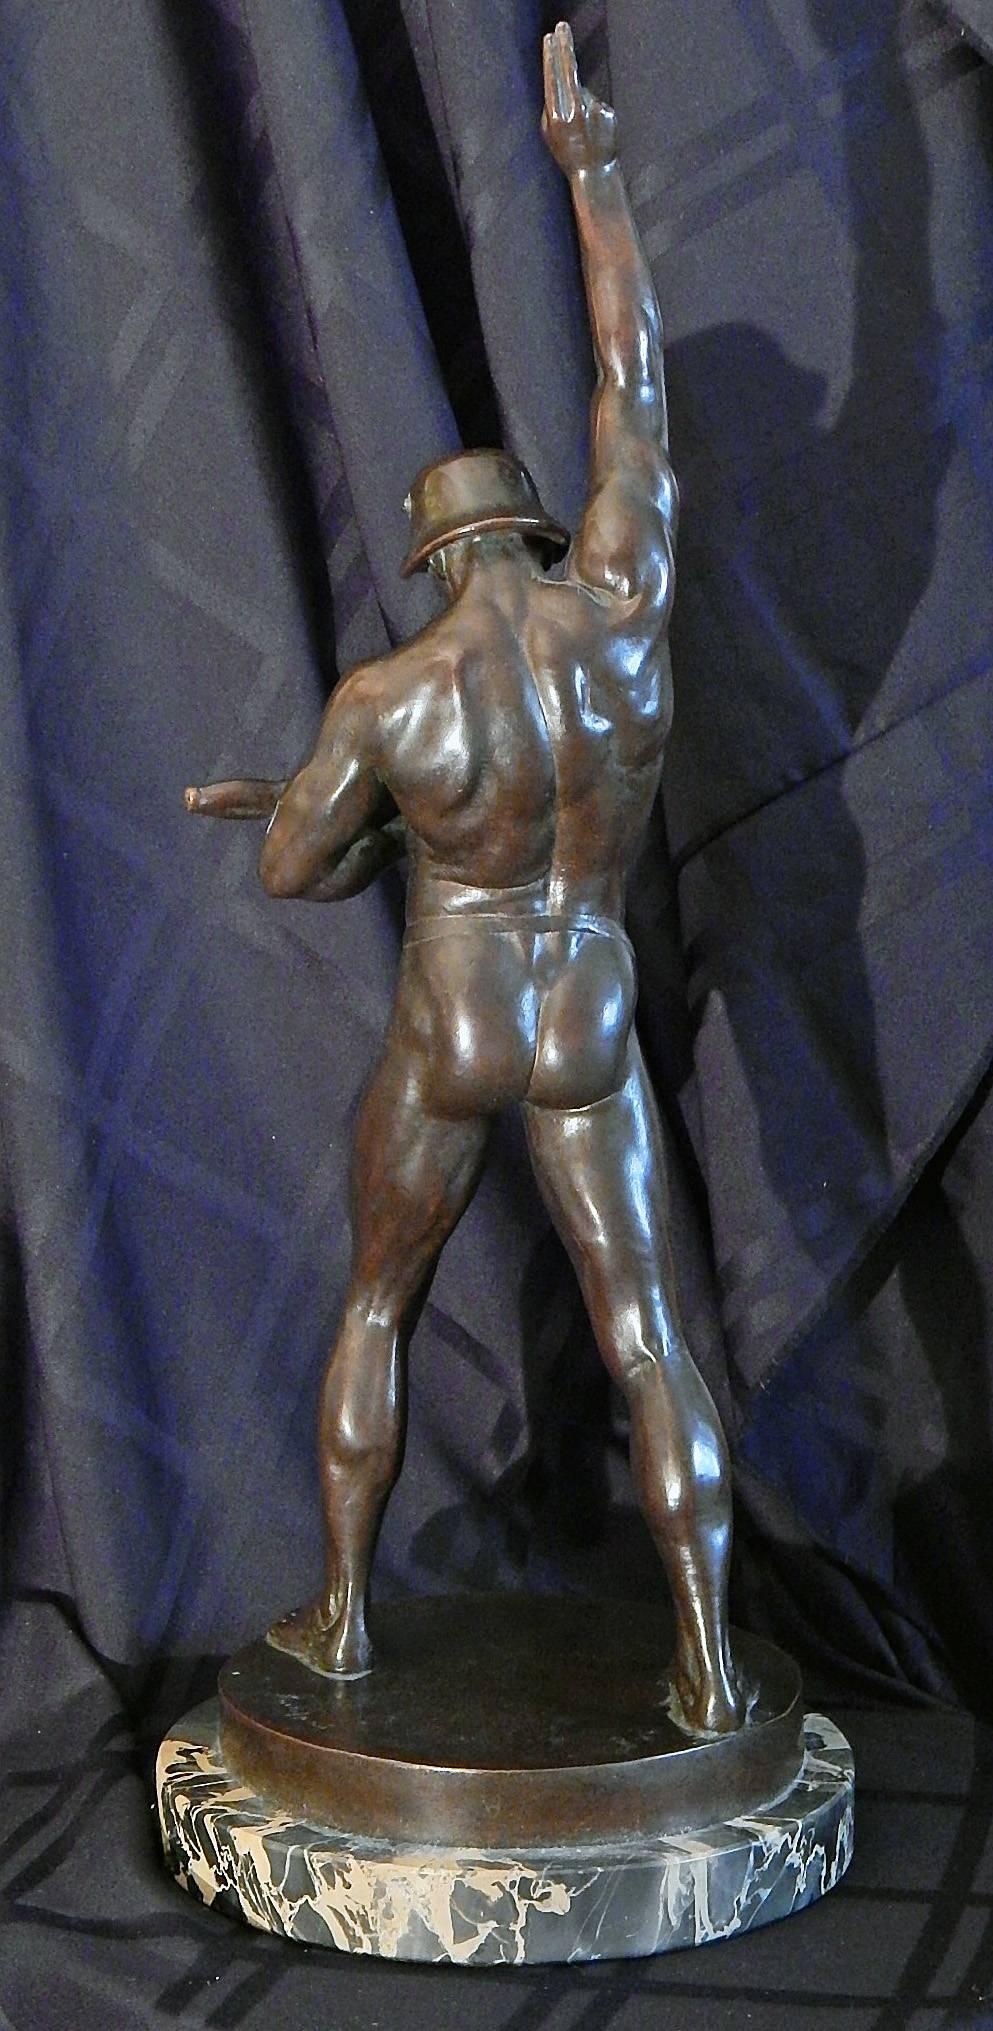 An extraordinary and very rare example of Art Deco memorial sculpture, this depiction of a nude soldier -- clothed with nothing but his metal helmet and a loincloth -- was created by Paul Juckoff-Skopau for Kyffhäuserhütte Artern, a mechanical